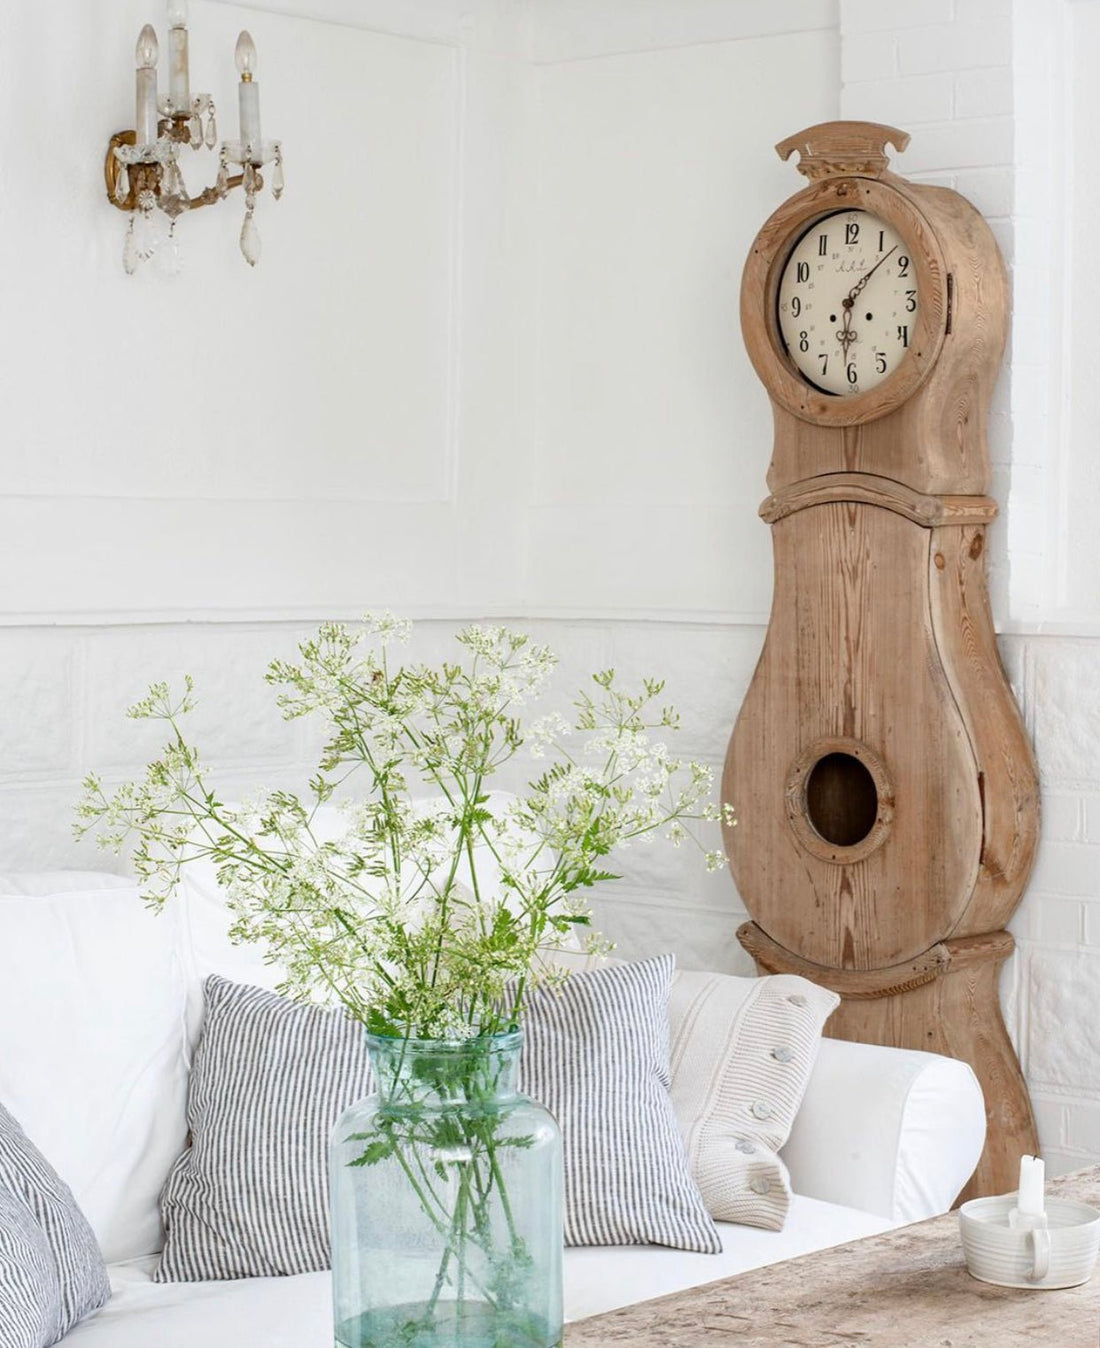 How To Make A Statement With A Stripped Wooden Mora Clock? - White & Faded